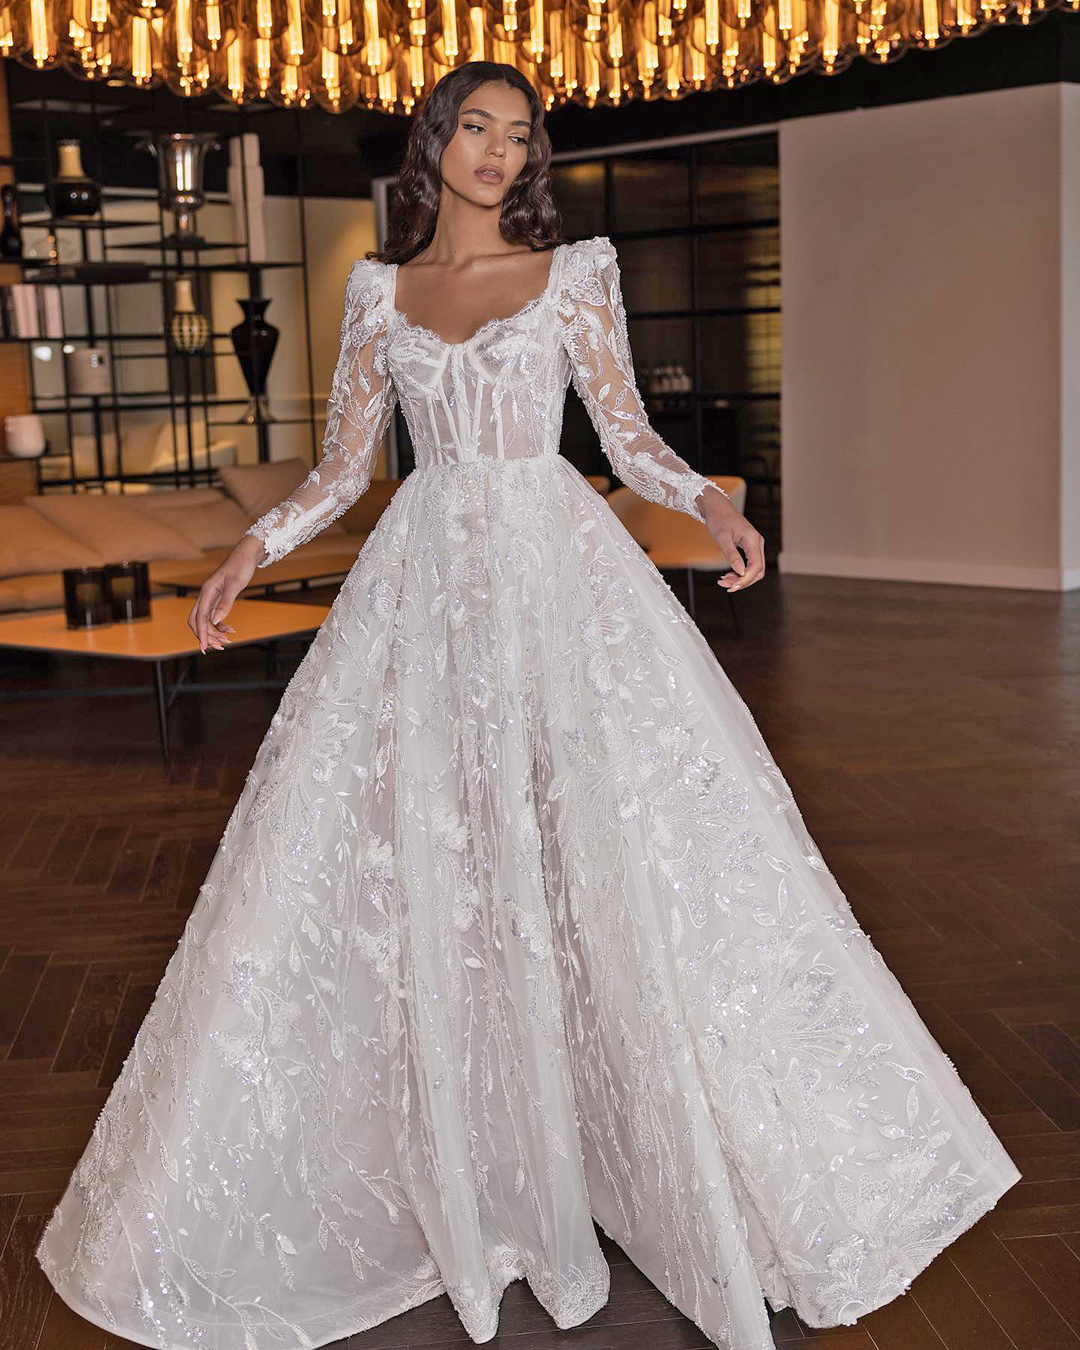 Adolescent sudden Can be ignored Most Pinned Wedding Dresses: 18 Gowns + FAQs